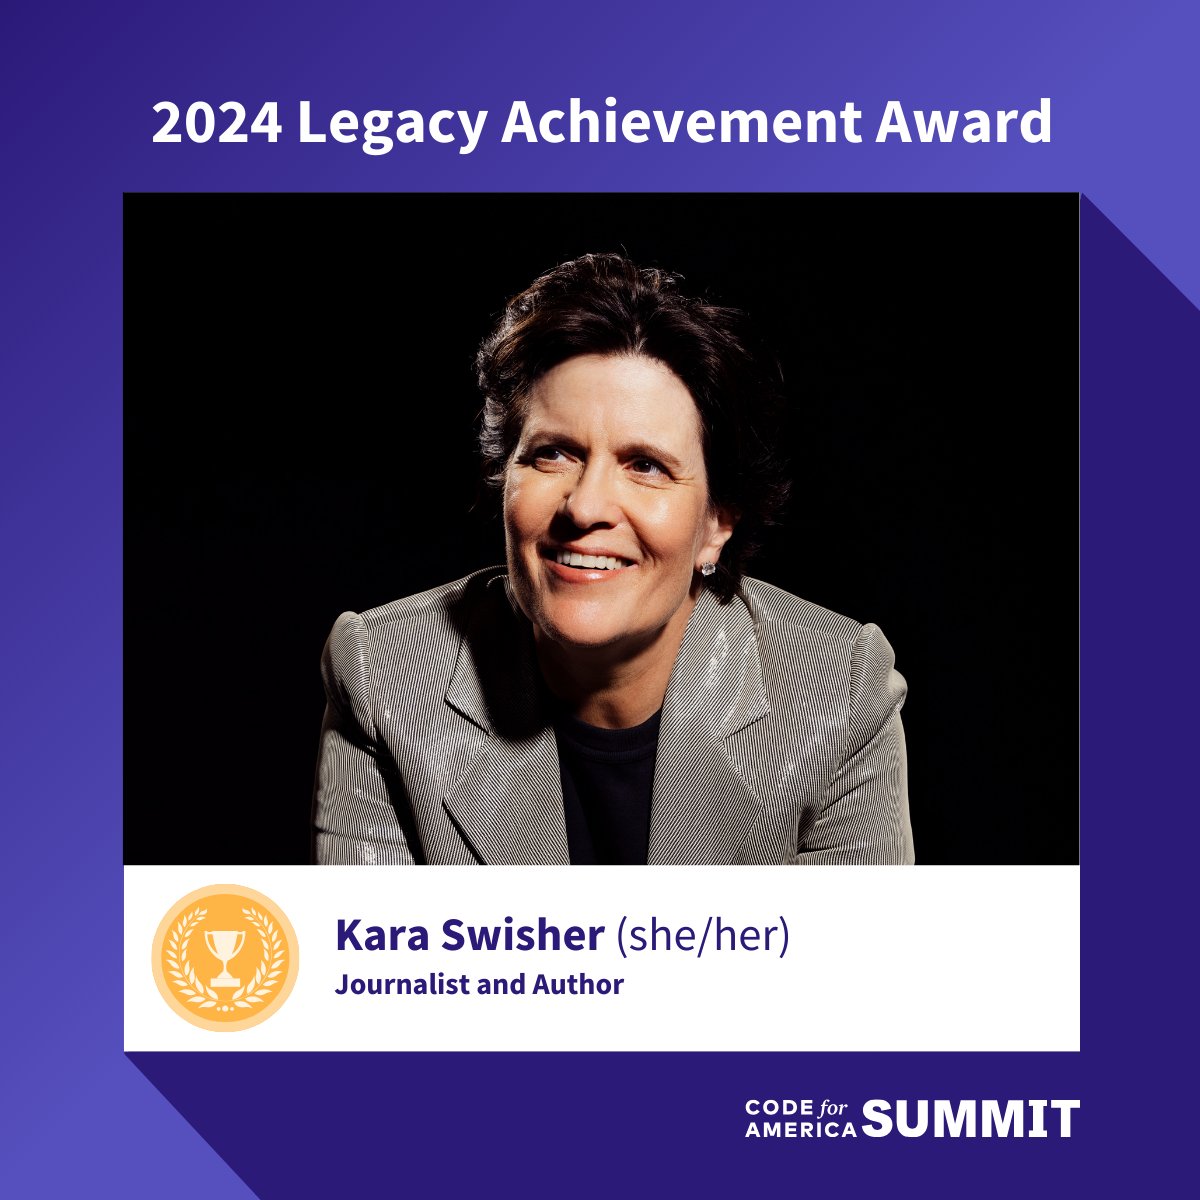 Congratulations to @KaraSwisher, our 2024 Legacy Achievement Award recipient. She's recognized for elevating the expectations for the tech industry throughout her journalism career. We're celebrating her achievements at #CfASummit later this month. bit.ly/3wyPd9n